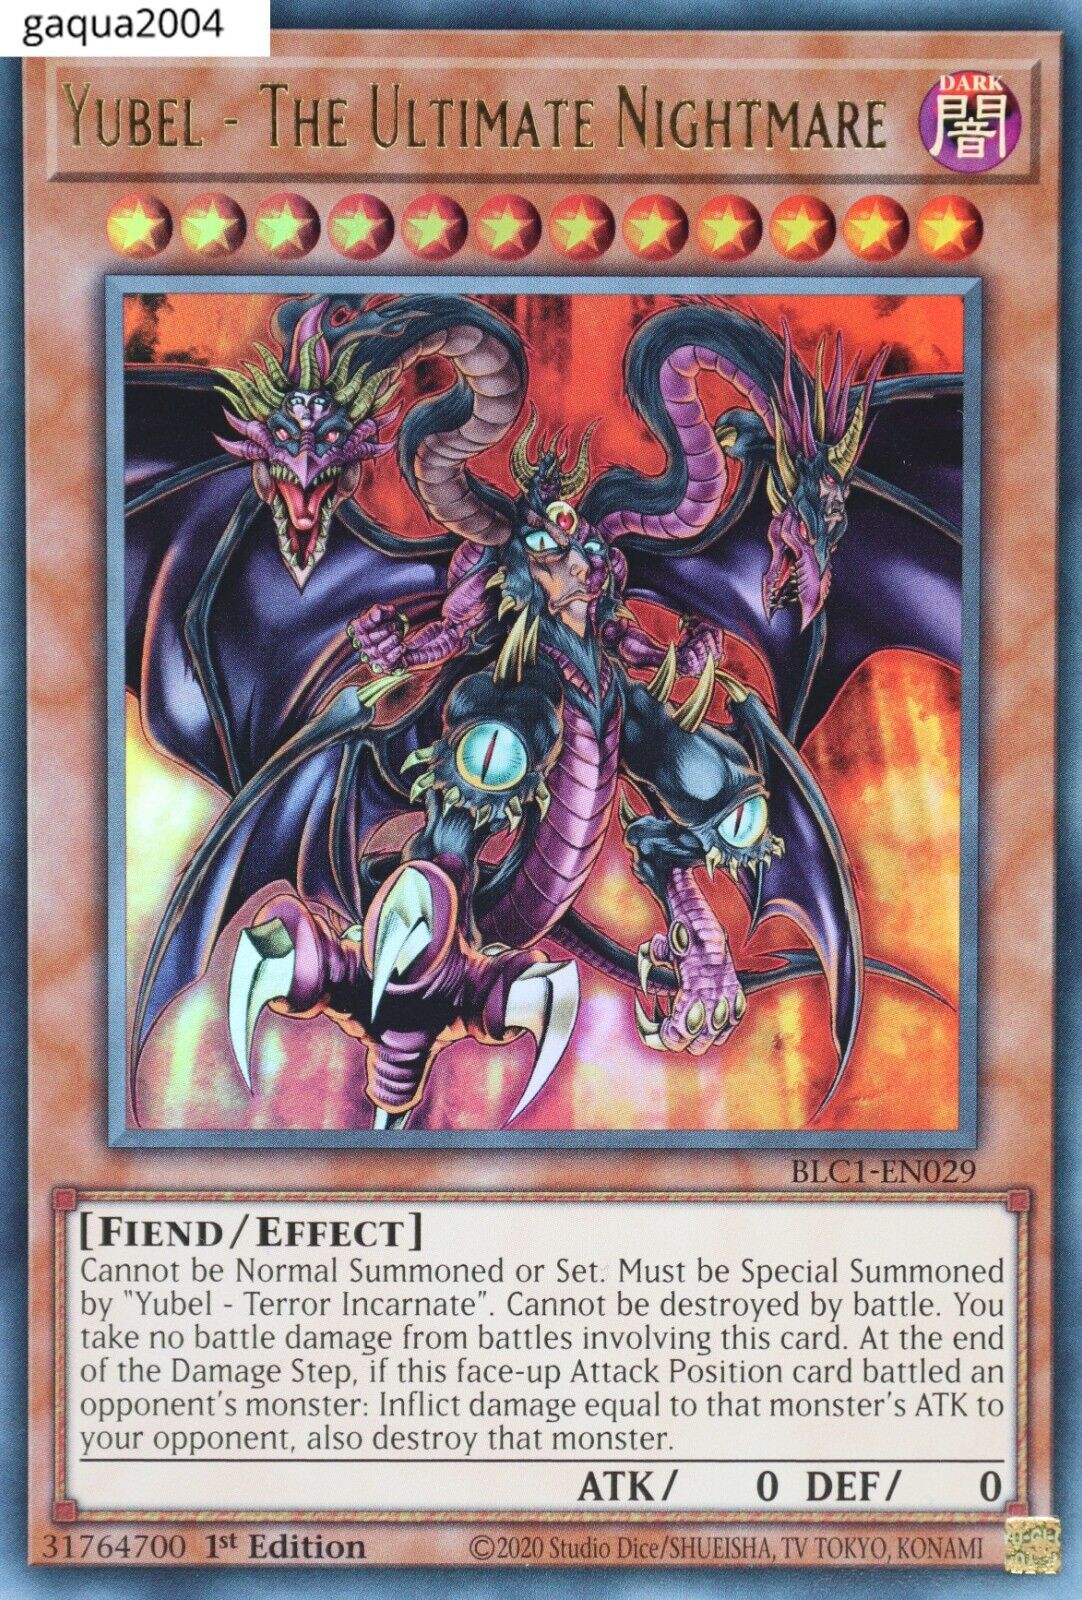 YuGiOh Yubel - The Ultimate Nightmare BLC1-EN029 Gold Ultra Rare 1st Edition